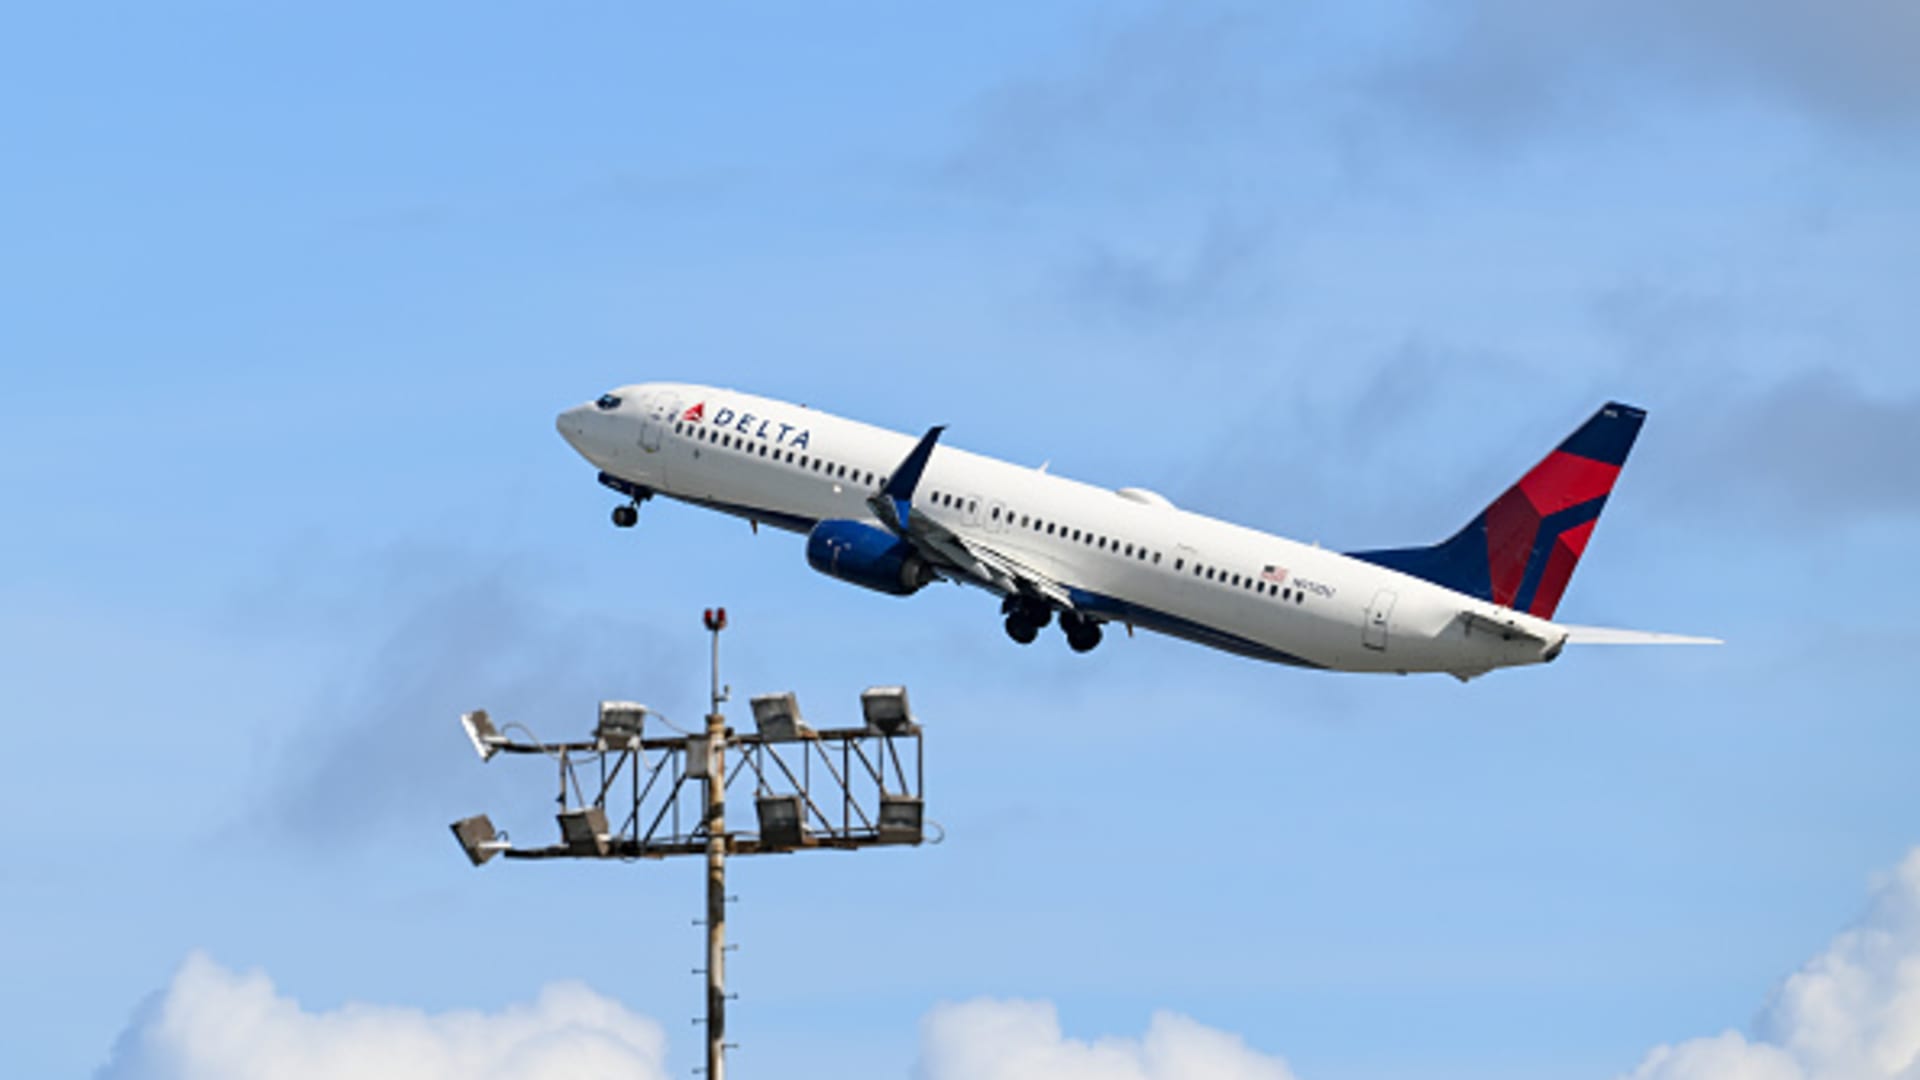 A Delta Airlines plane takeoff from San Francisco International Airport (SFO) in San Francisco, California, United States on February 21, 2024.